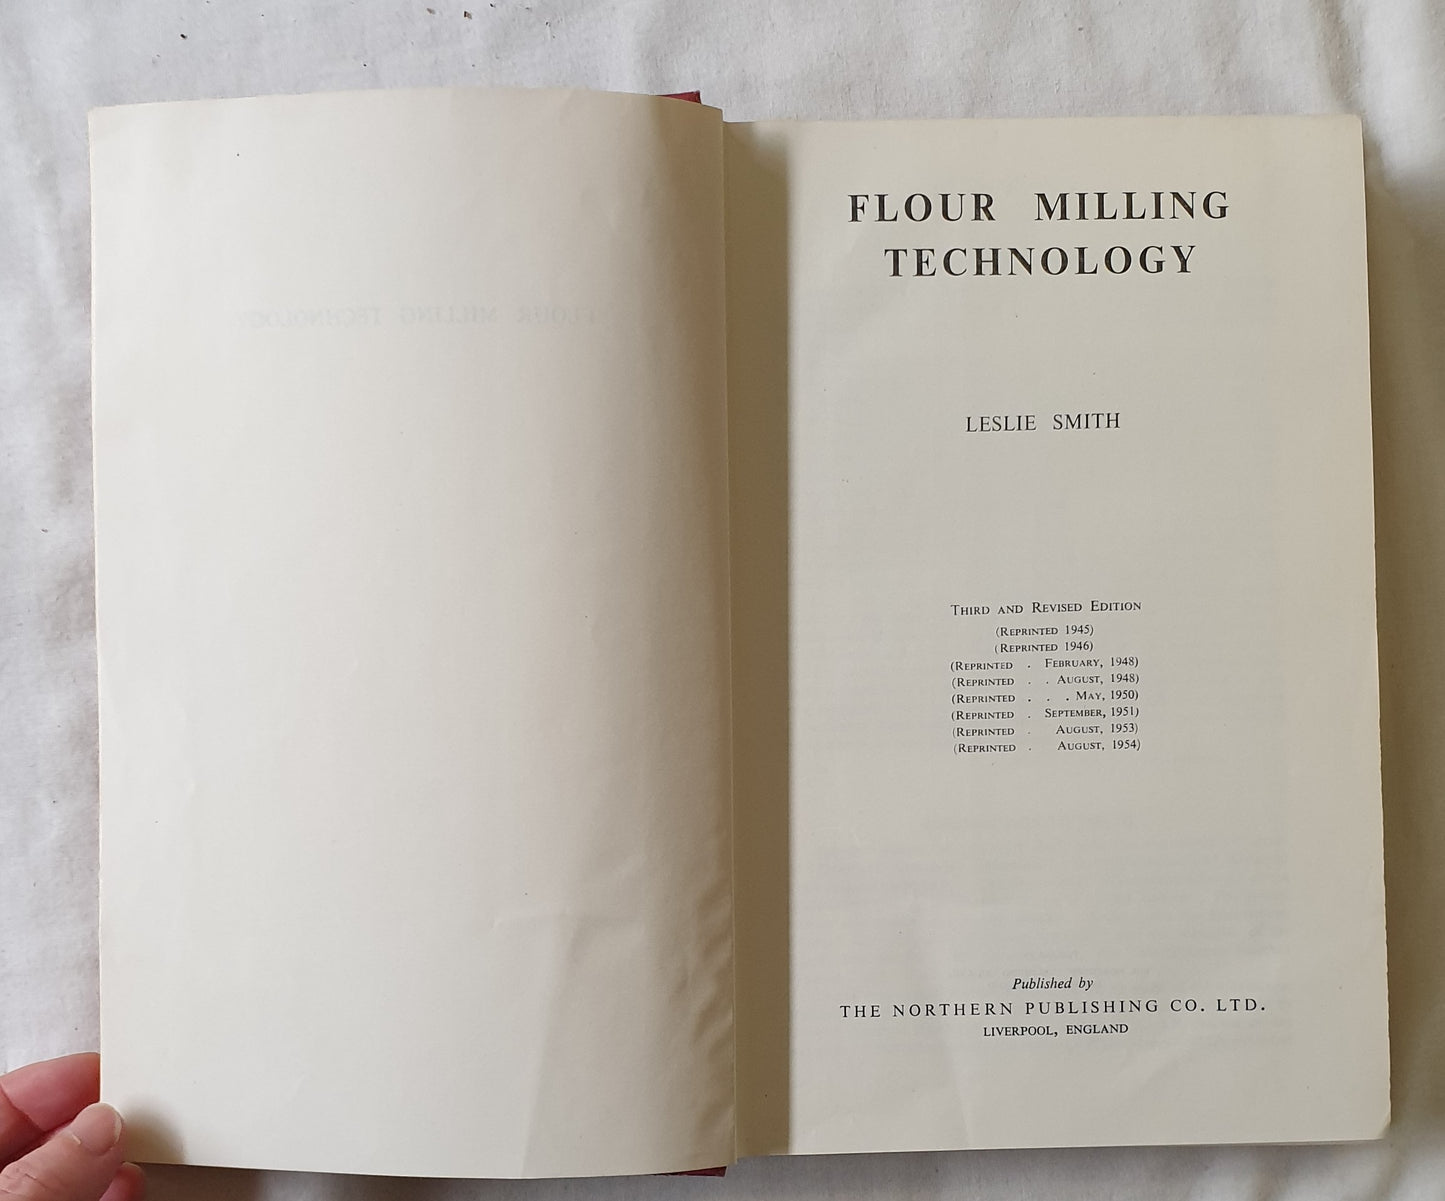 Flour Milling Technology by Leslie Smith